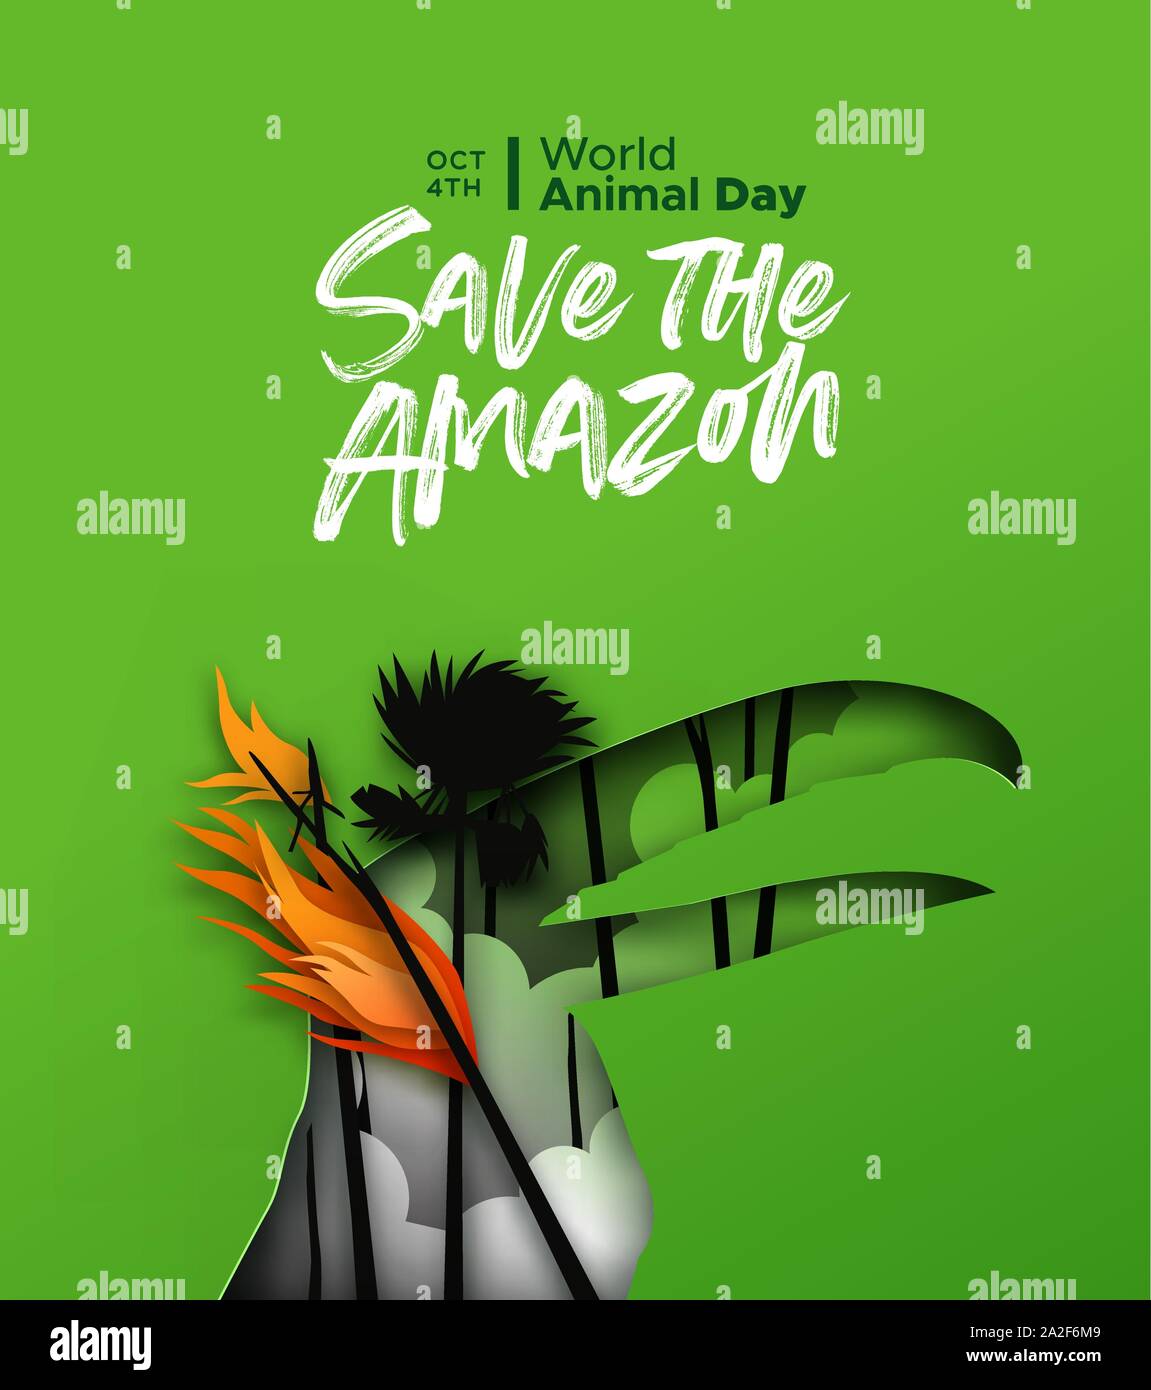 Save the amazon papercut illustration for world animal day. Paper cut toucan bird with forest fire landscape in 3d cutout style. Endangered species co Stock Vector